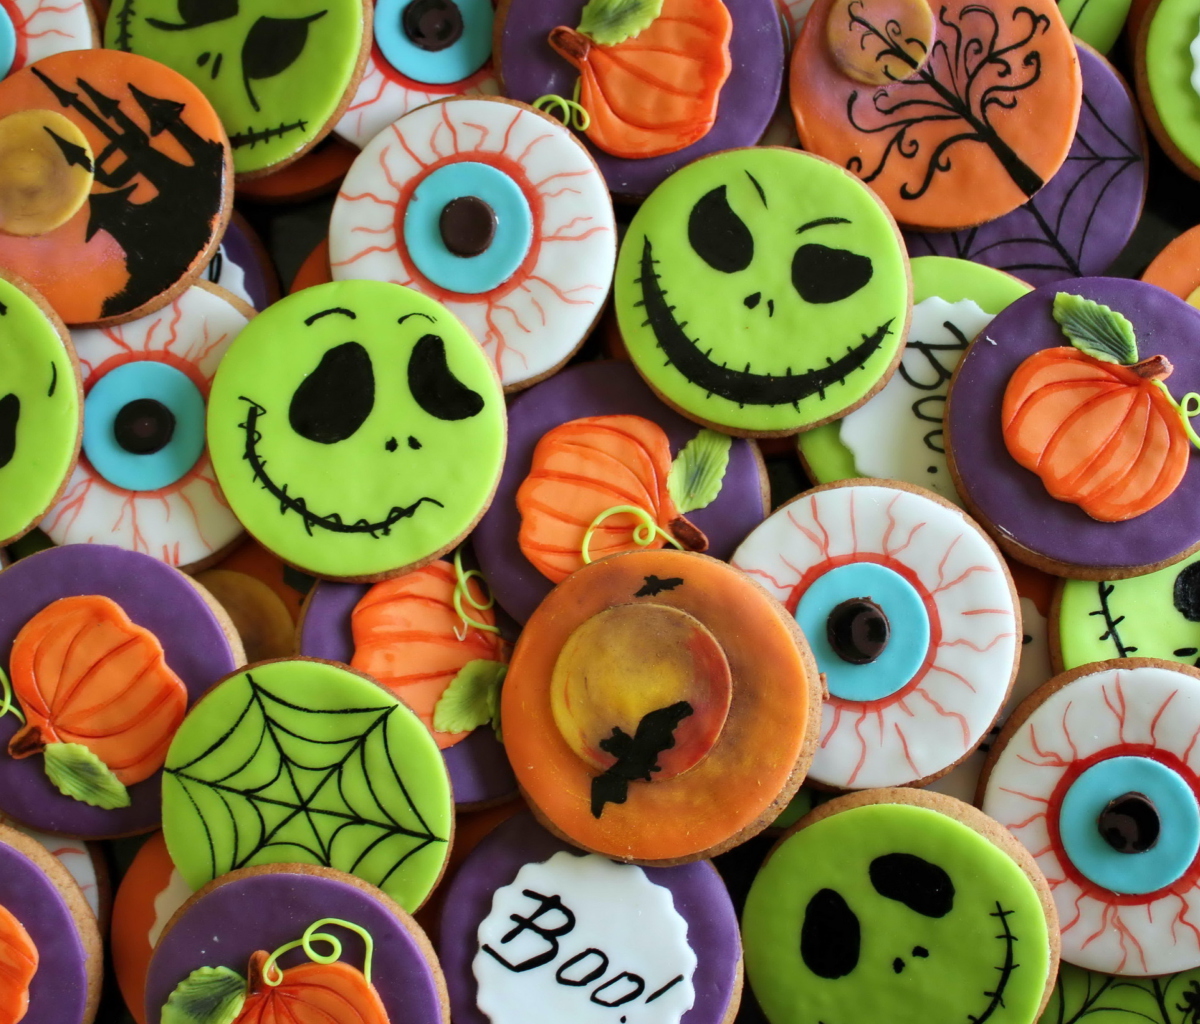 Scary Cookies wallpaper 1200x1024